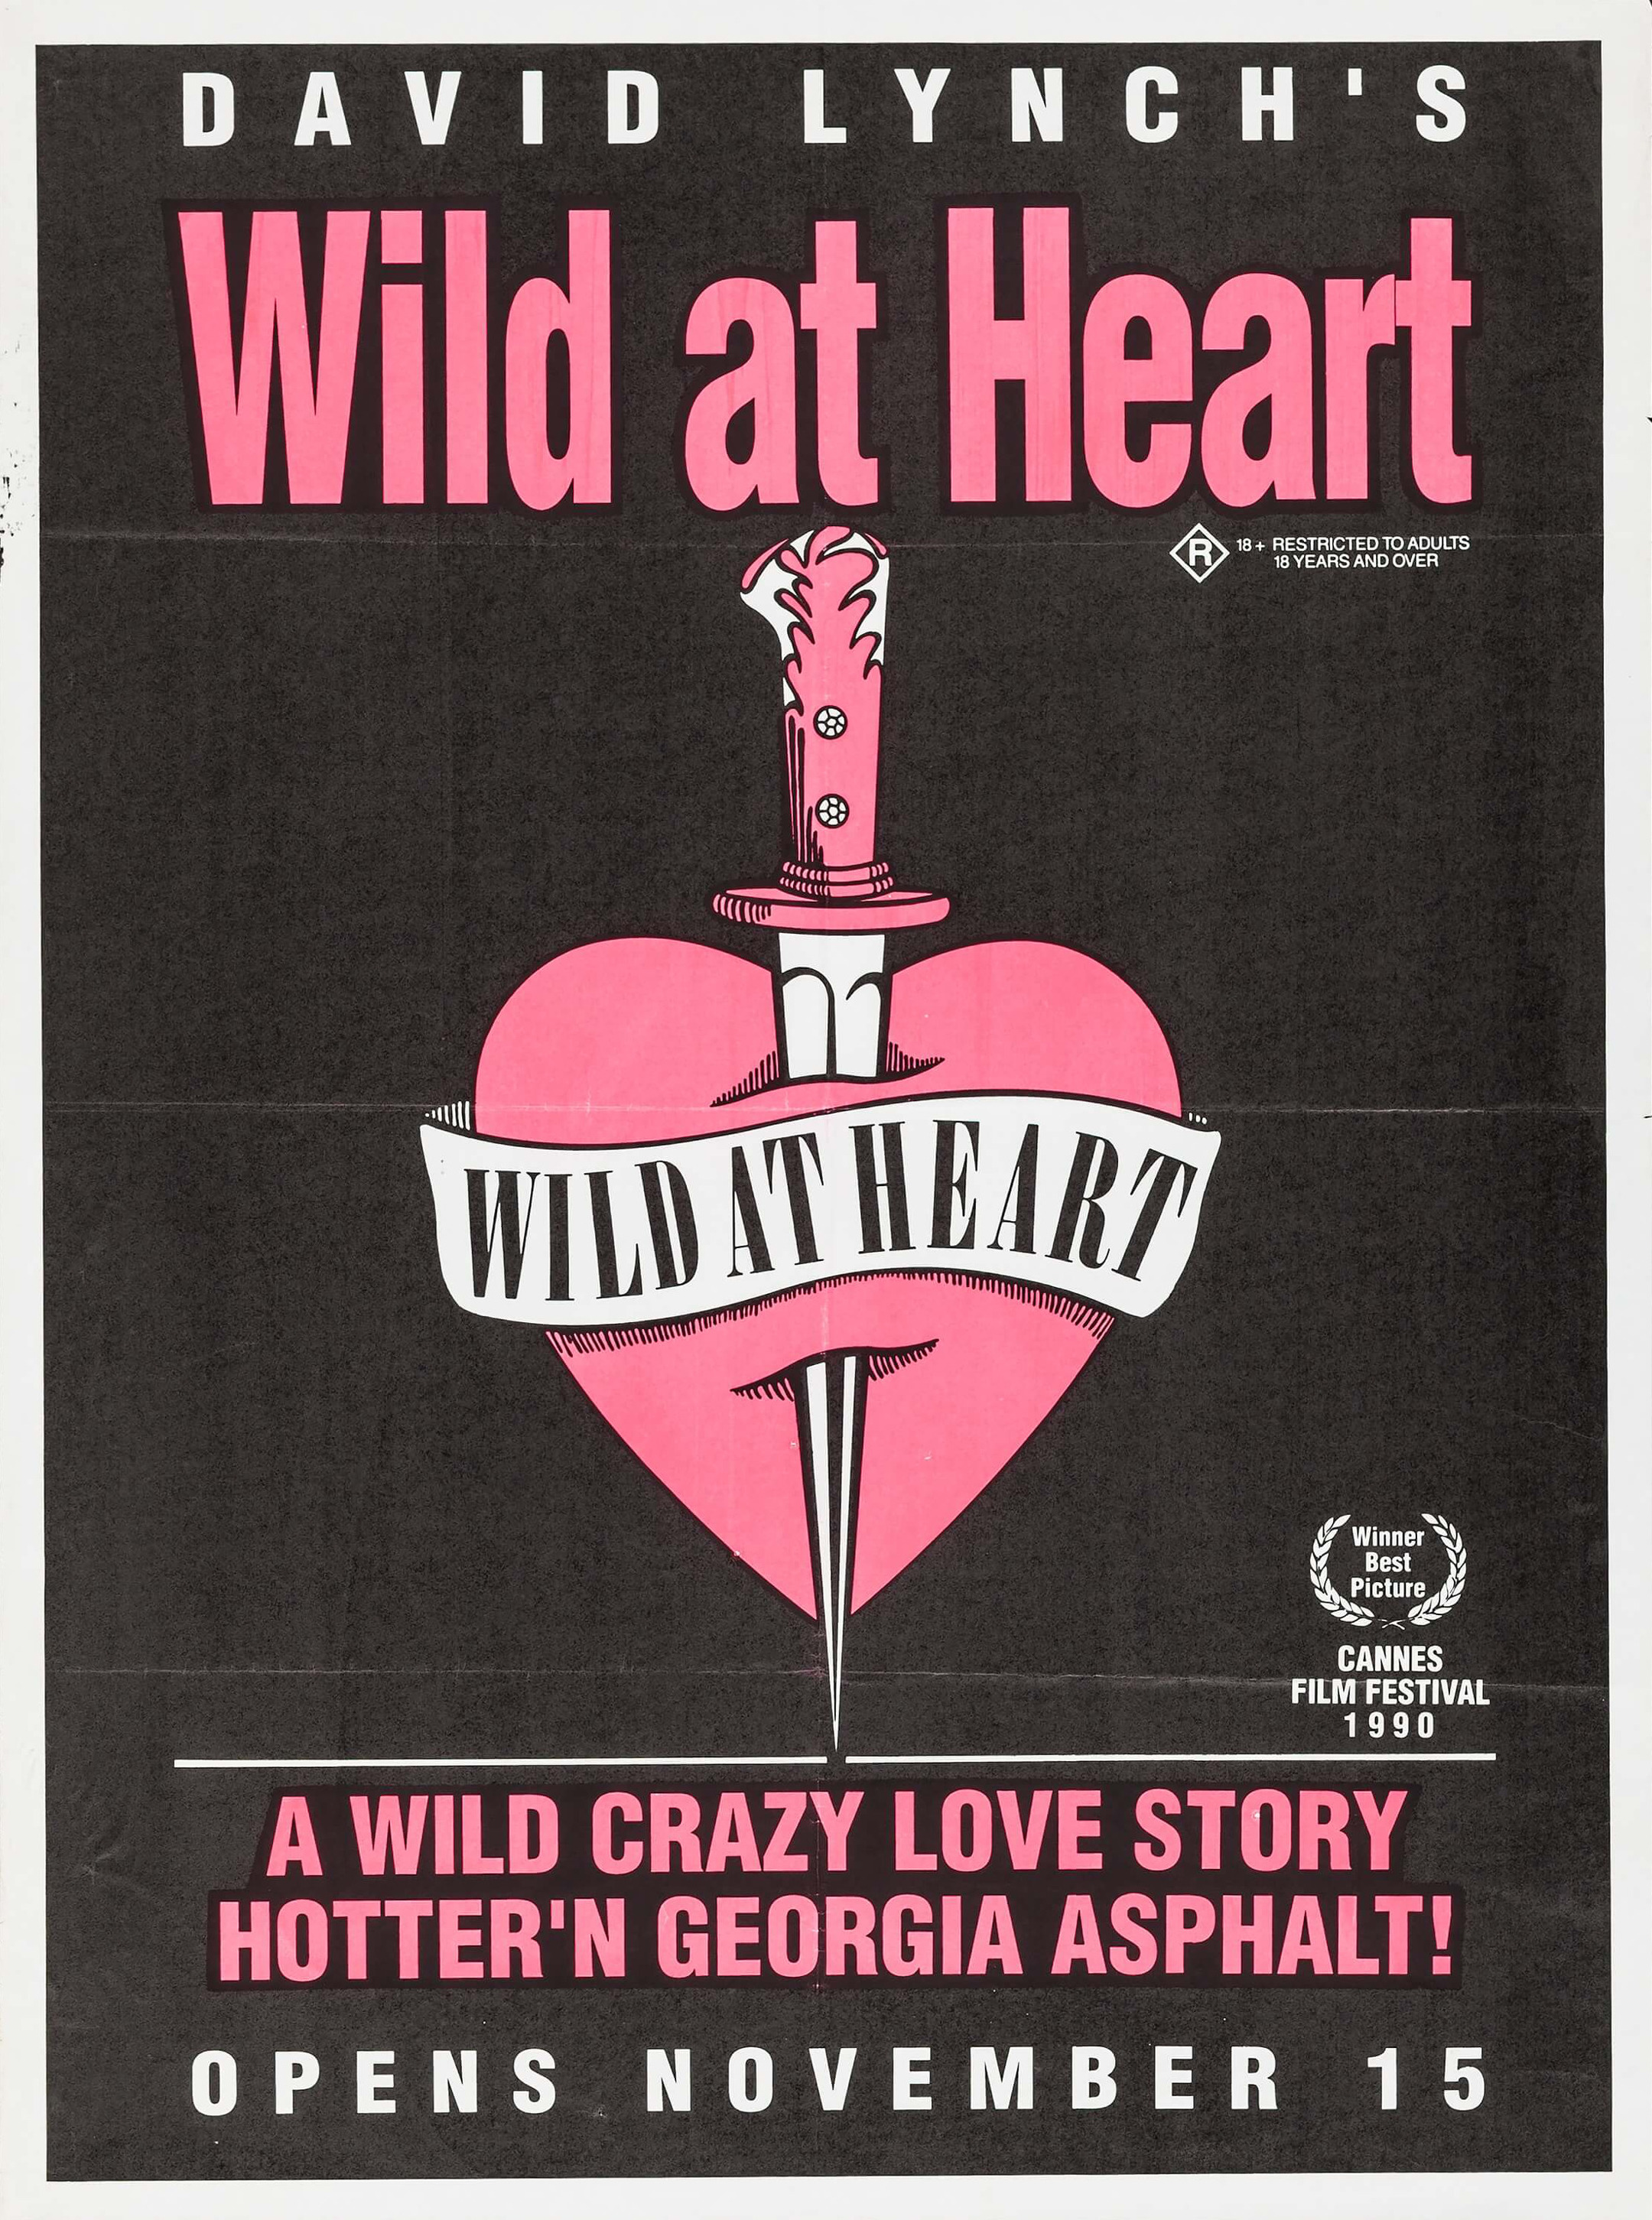 Wild at heart cover film